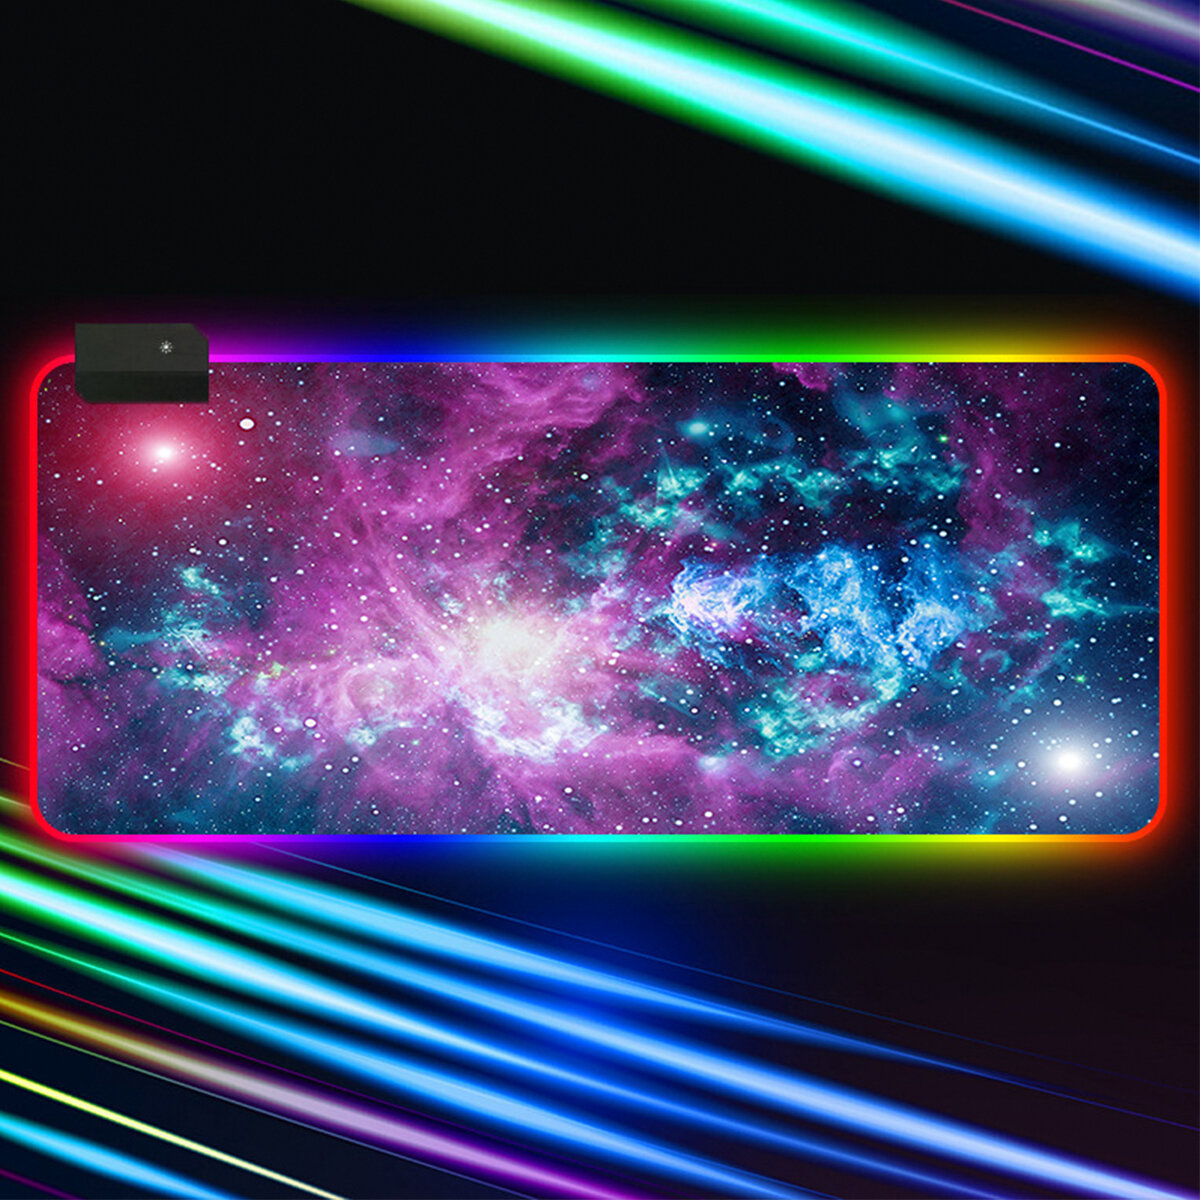 

RGB Mouse Pad Soft Rubber Anti-slip USB Powered Starry Sky LED Glowing Gaming Keyboard Pad Desktop Protective Mat for Ho